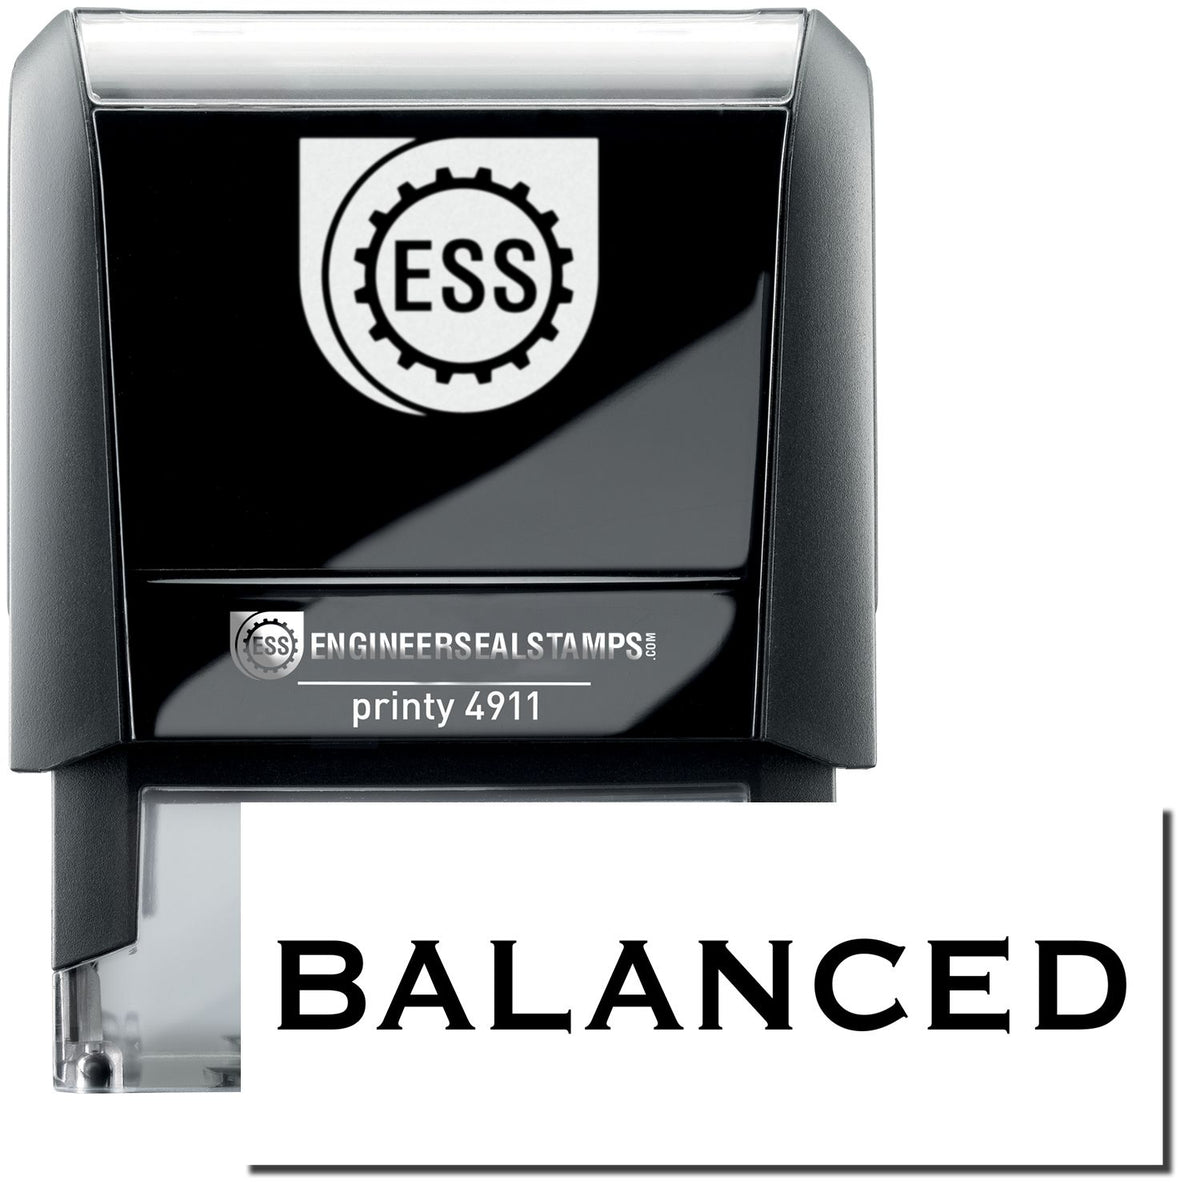 A self-inking stamp with a stamped image showing how the text &quot;BALANCED&quot; is displayed after stamping.